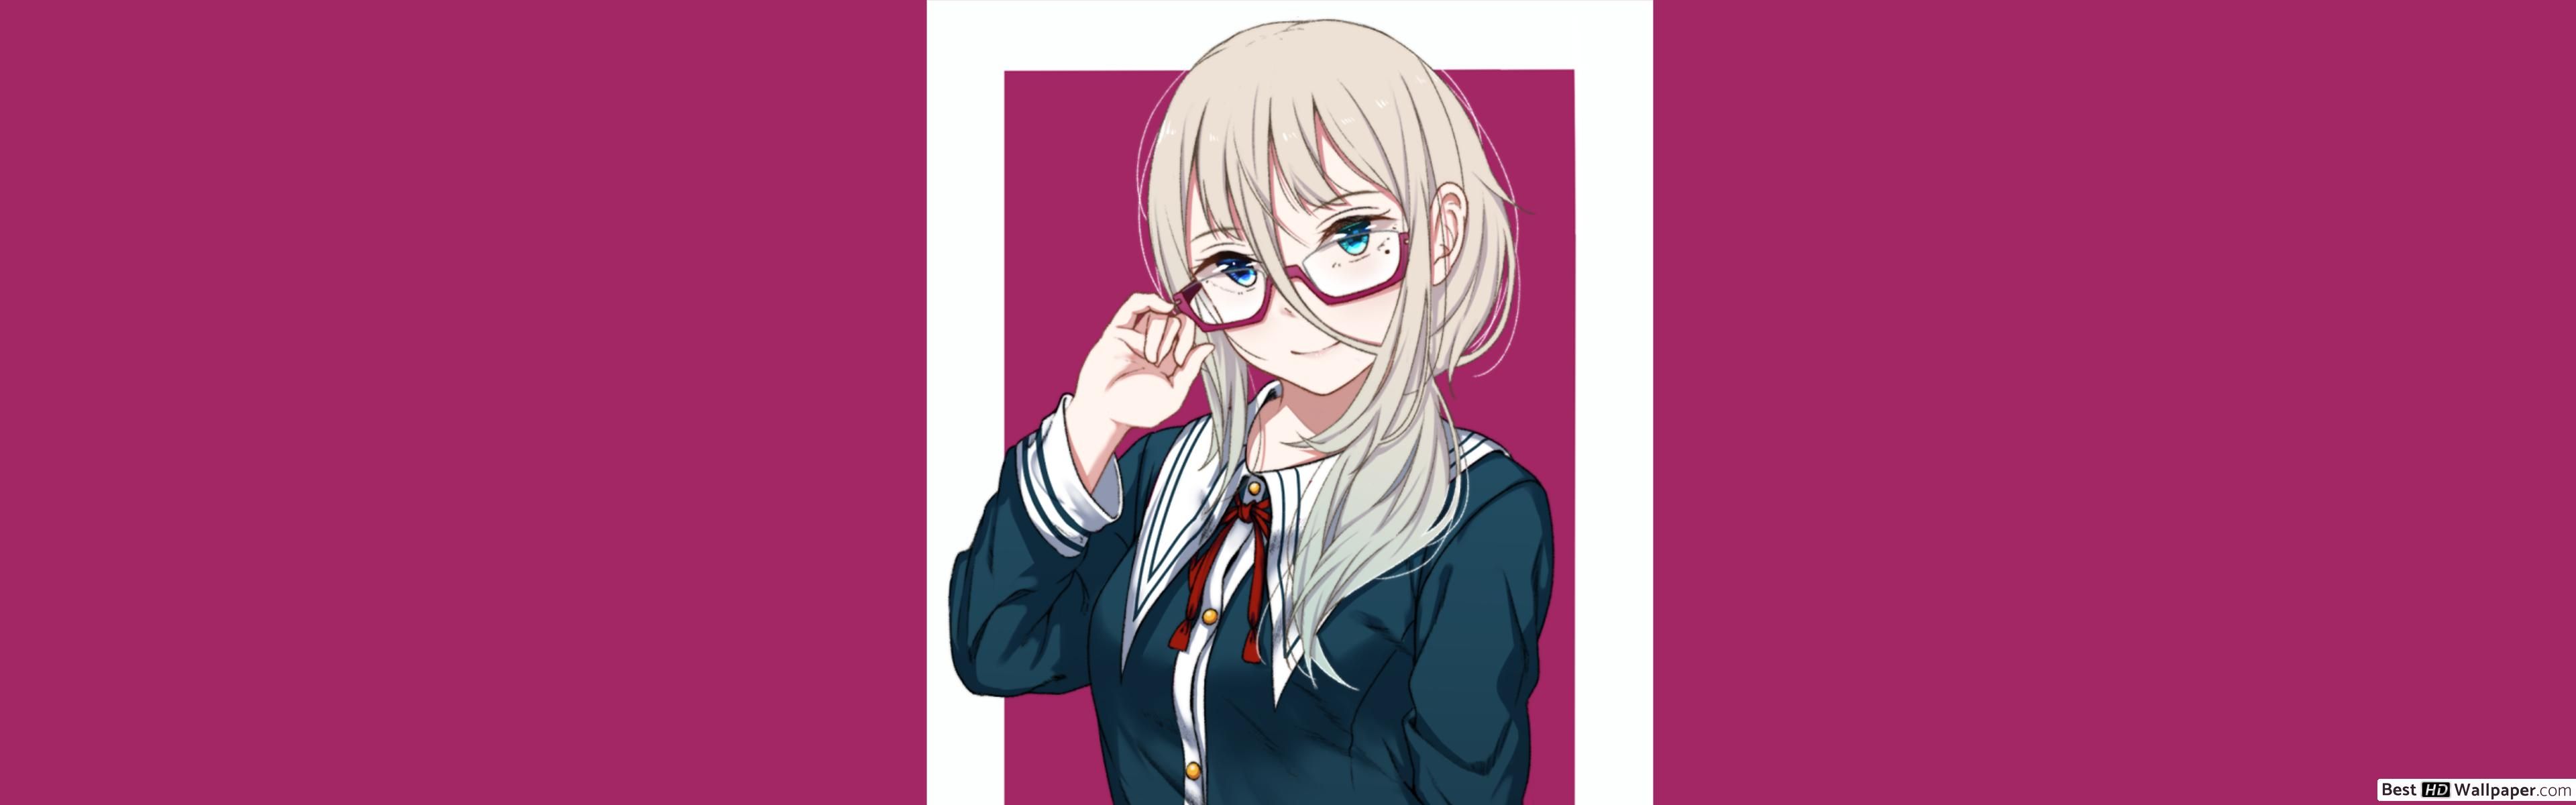 Cute school white haired girl in glasses HD wallpaper download